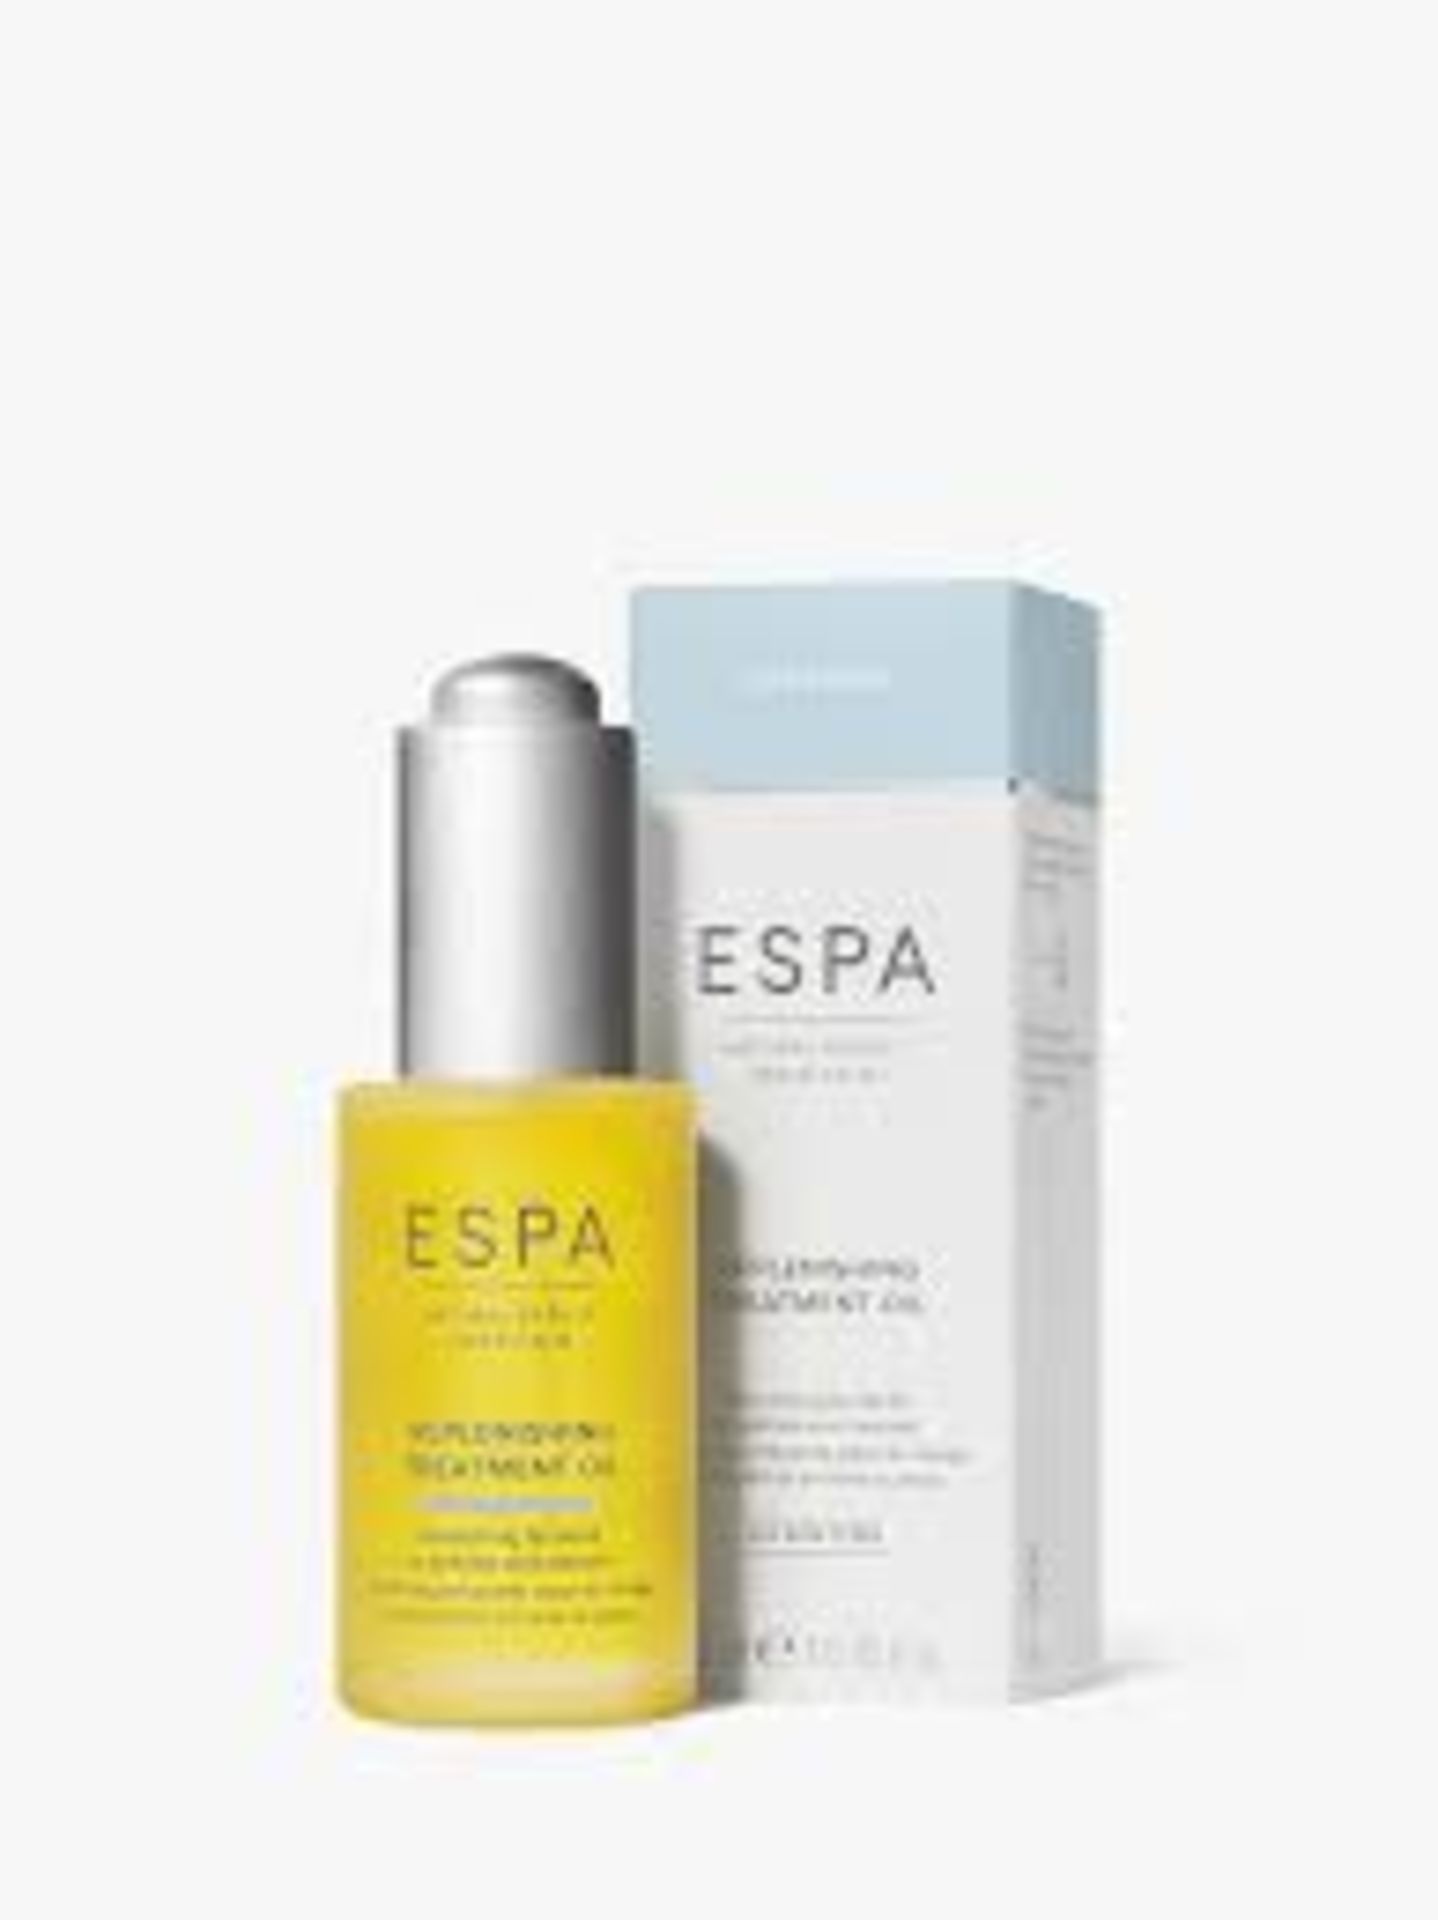 TRADE LOT TO CONTAIN 50x NEW ESPA Replenishing Face Treatment Oil 15ml. RRP £31 EACH. (EBR7). A